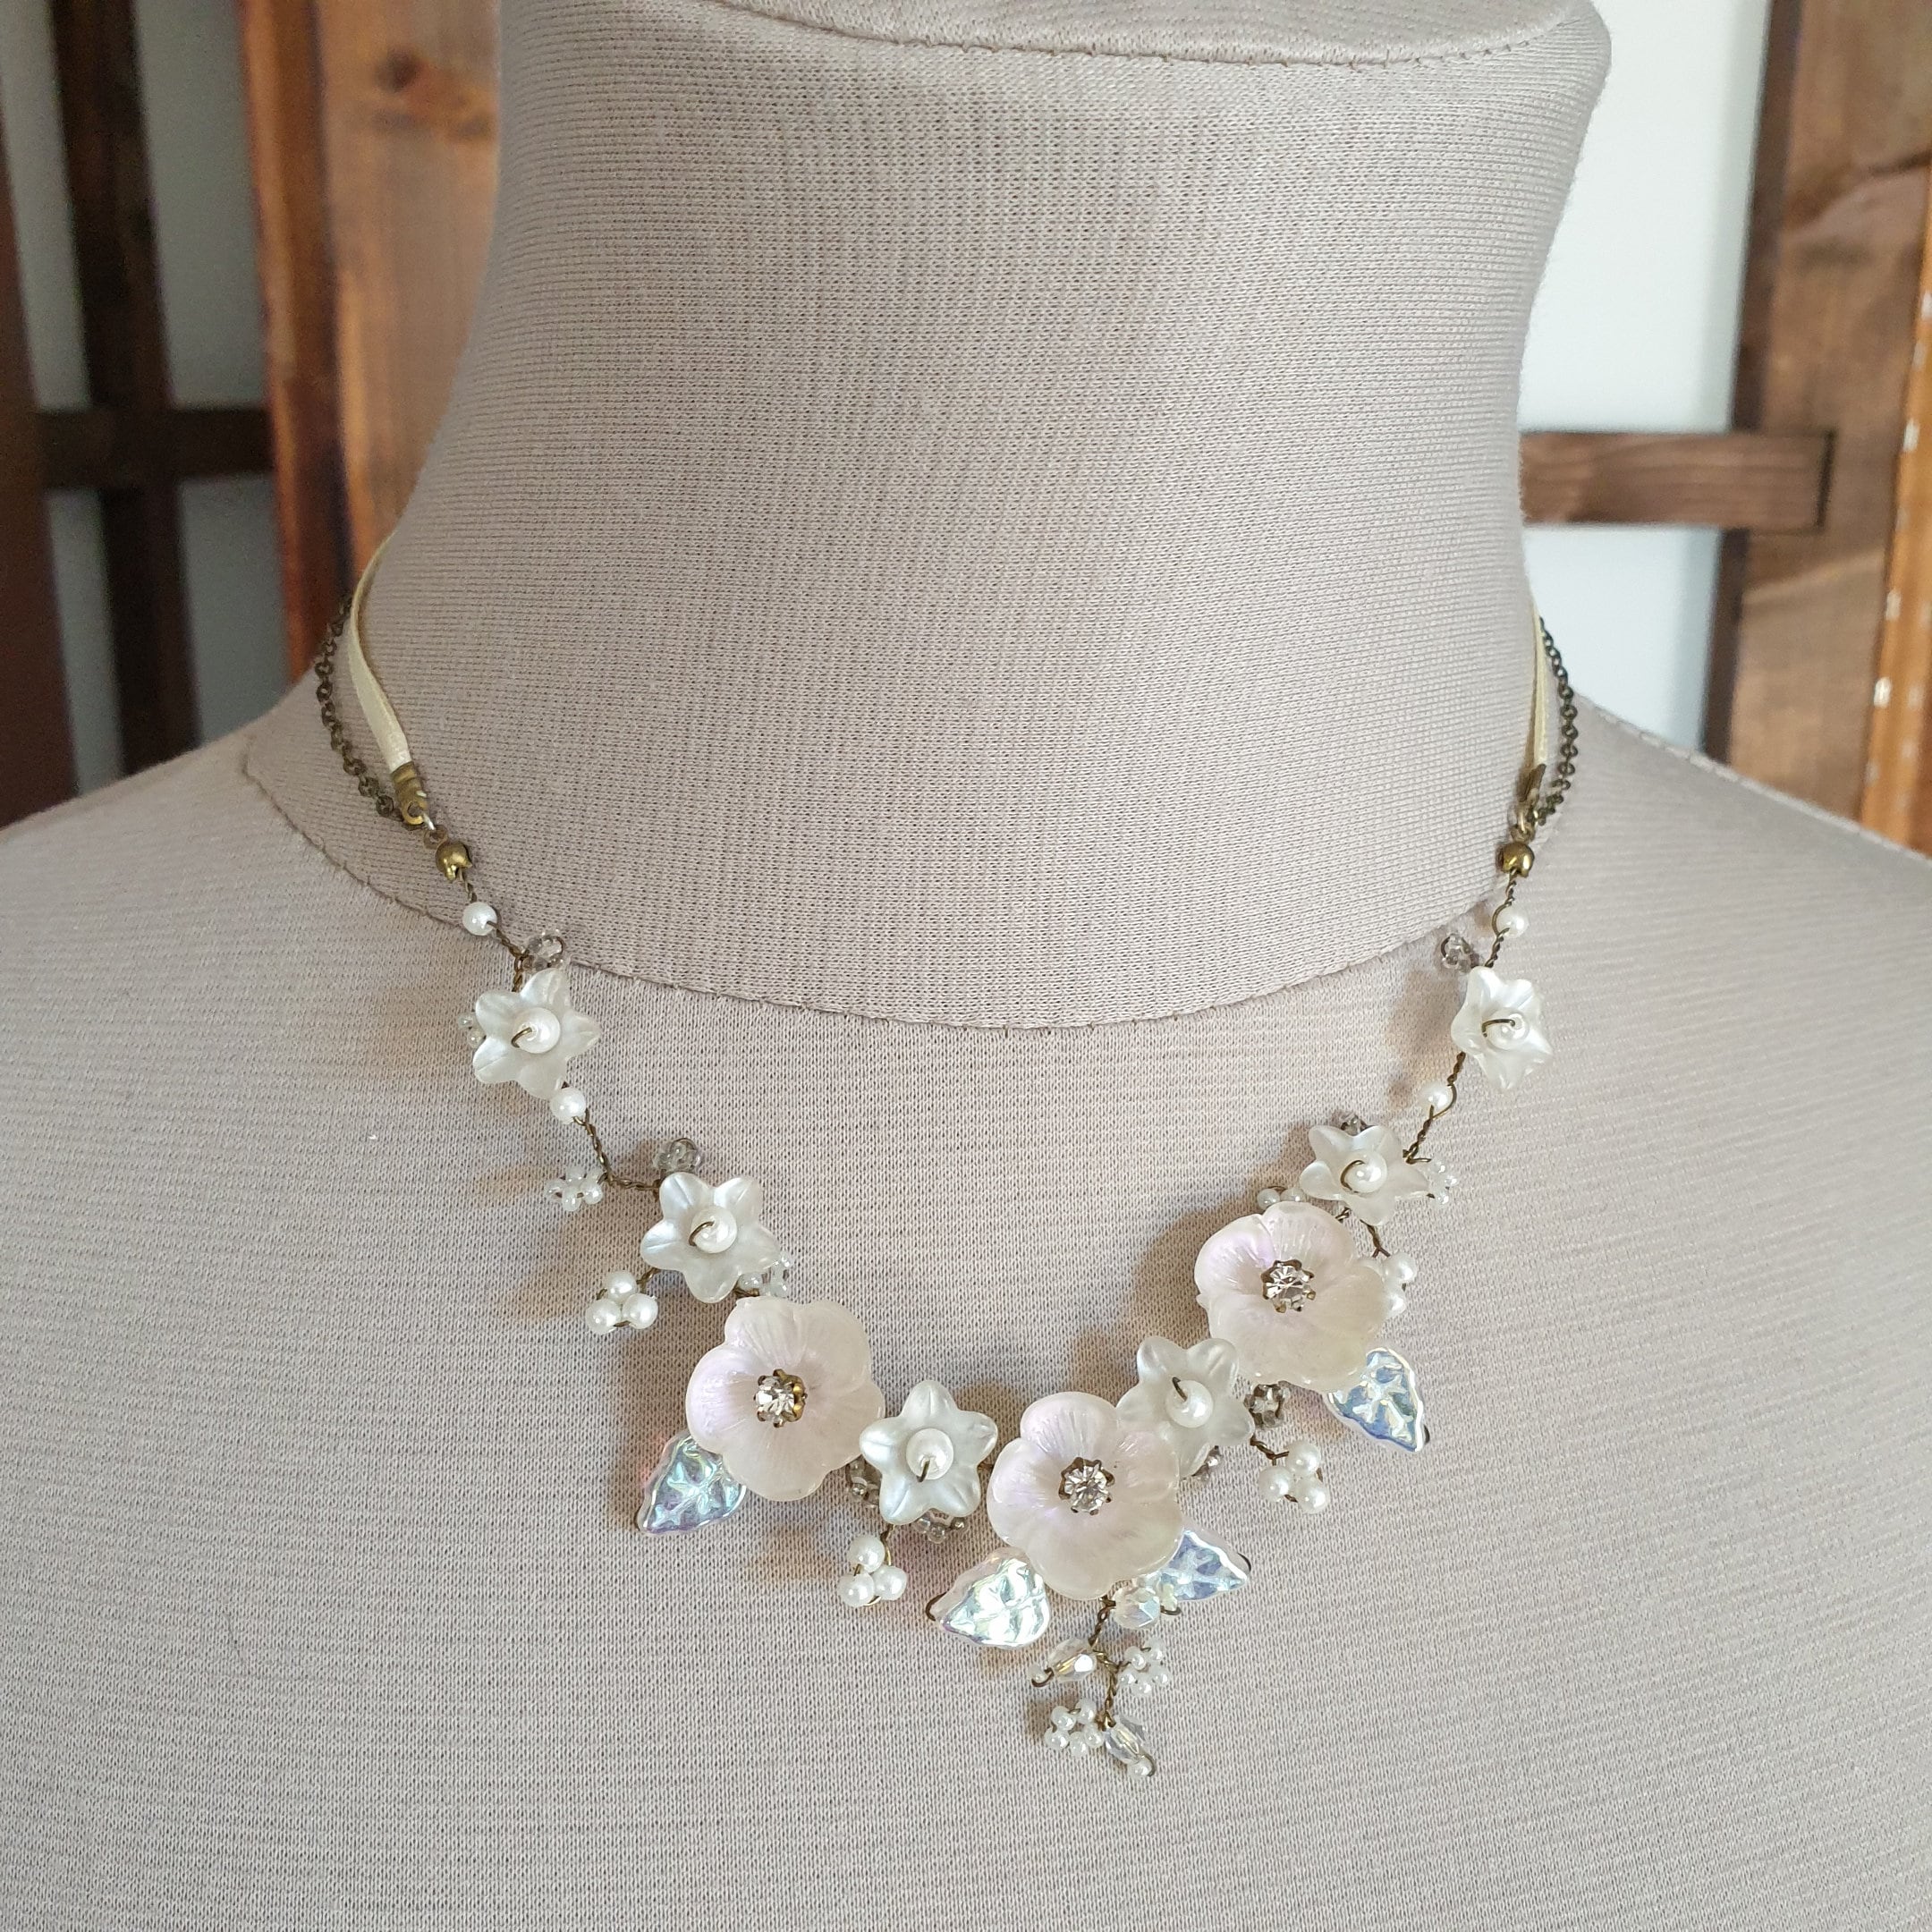 Buy Wedding Necklace With Flowers and Leaves in Iridescent Pink